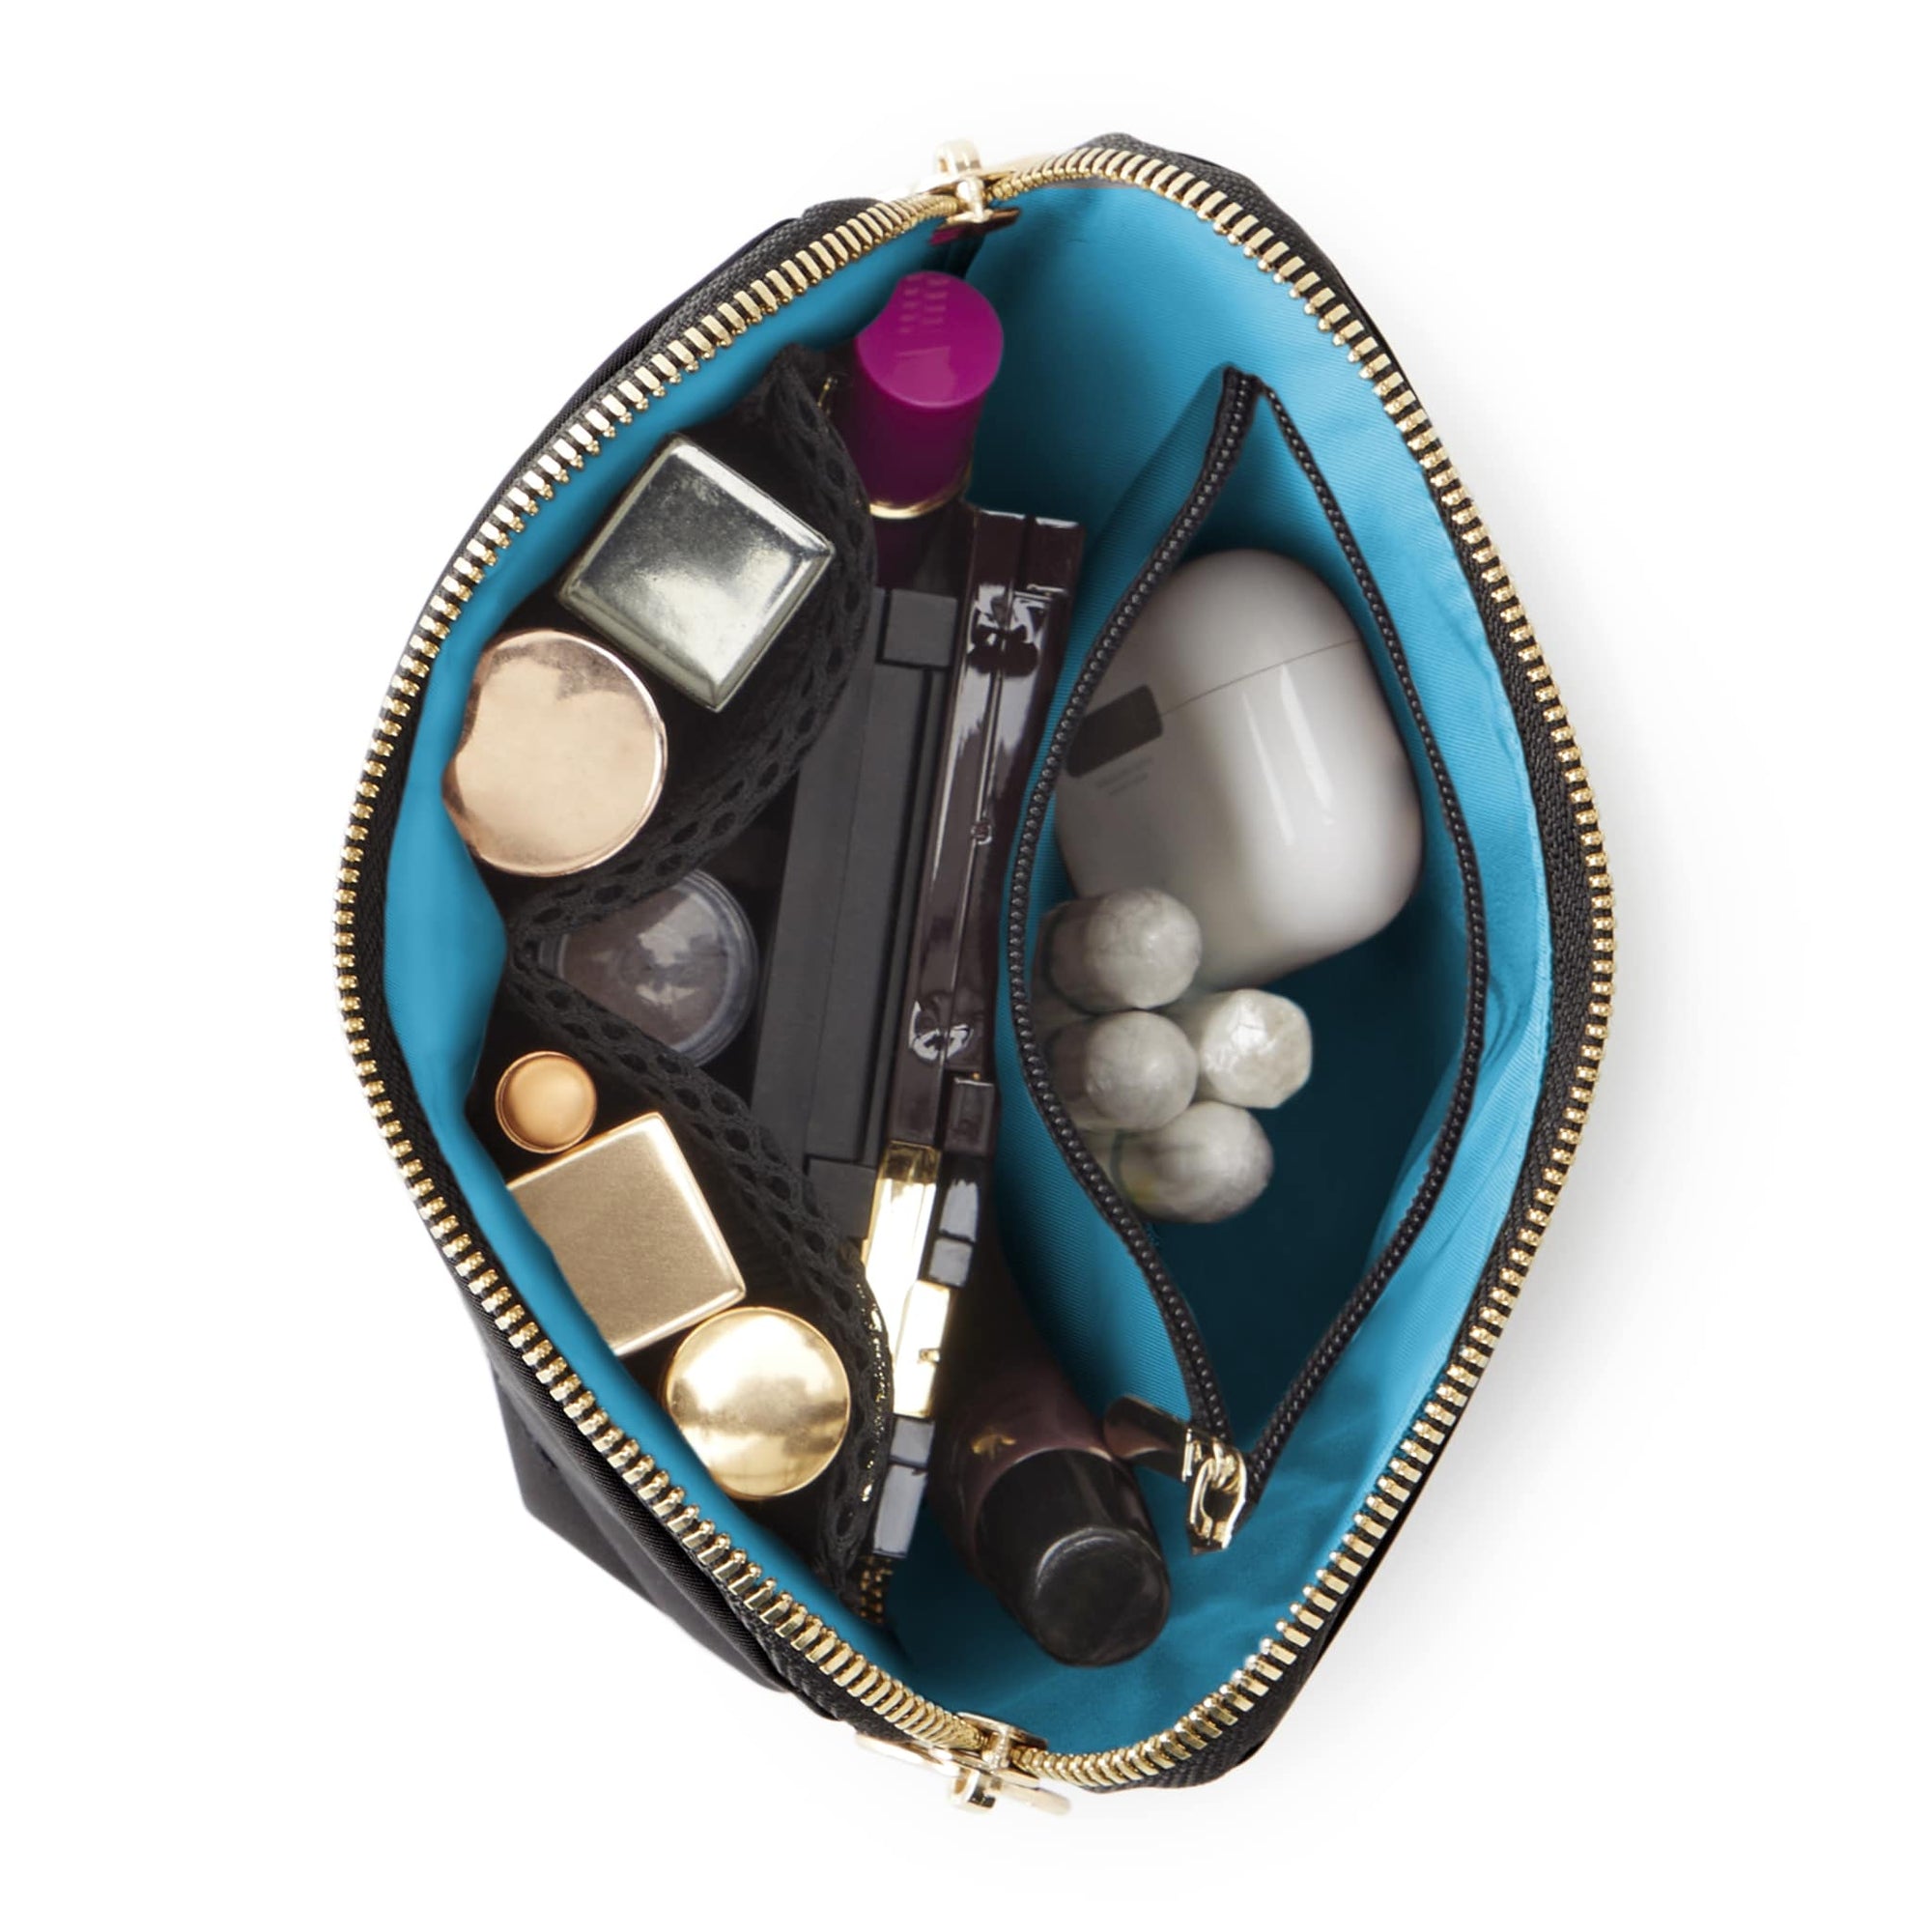 color: Everyday+Satin Black Fabric with Teal Interior; alt: Everyday Small Size Makeup Bag | KUSSHI